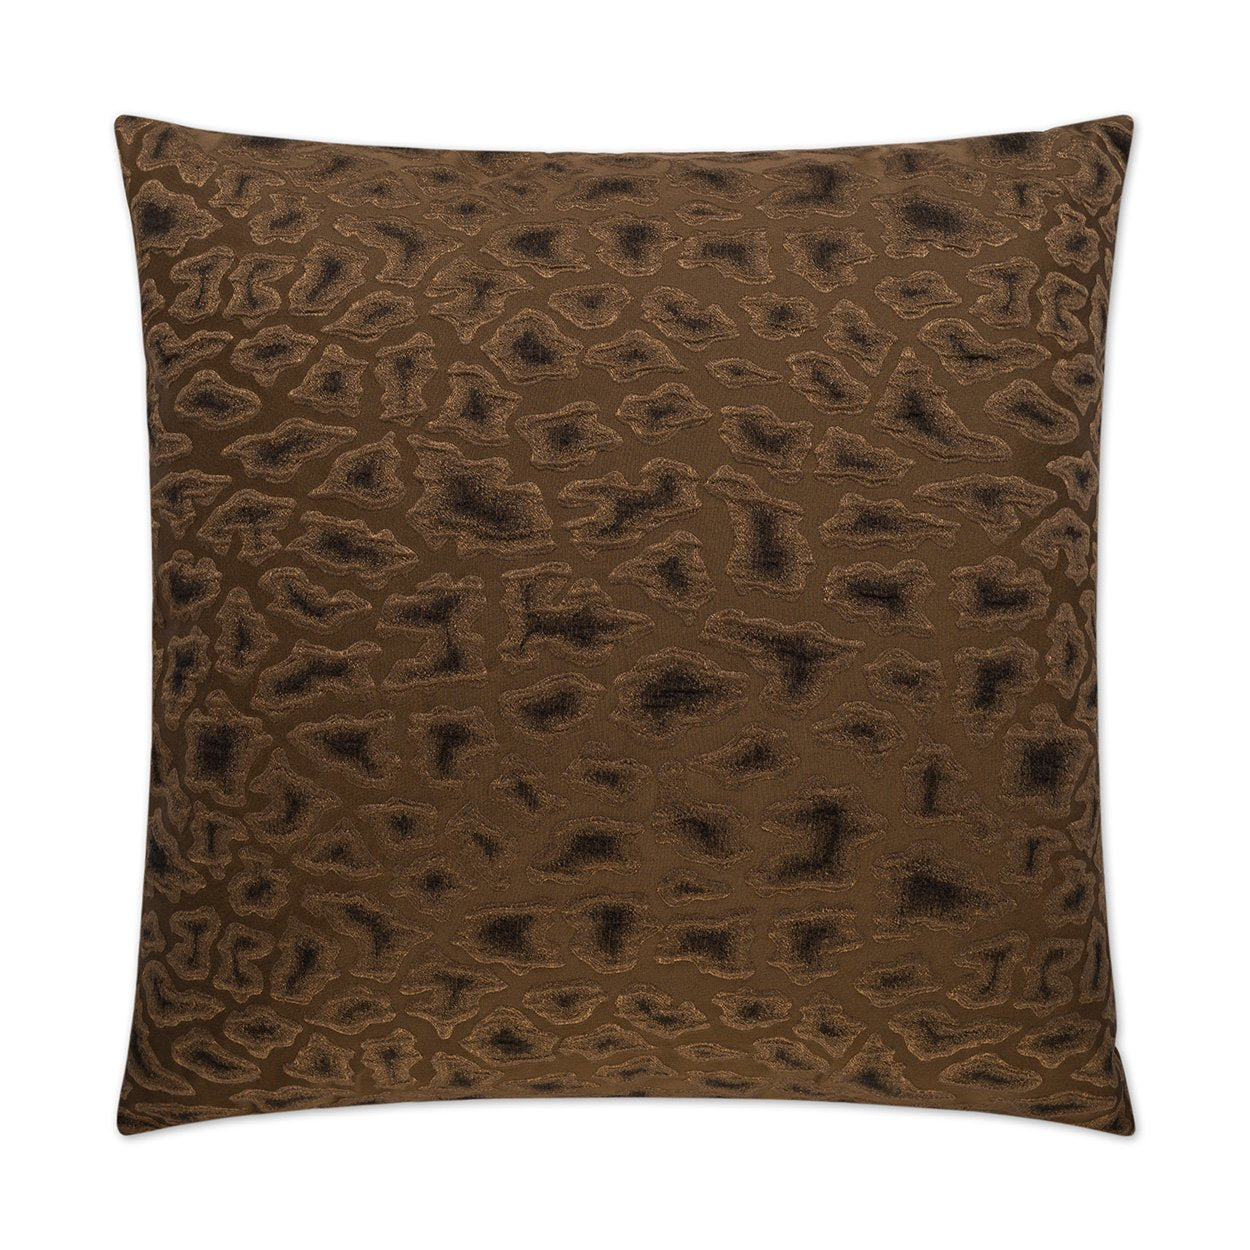 Luxury Pillow - 24” x 24” - Cabenet Chocolate; Espresso brown animal print over chocolate brown background